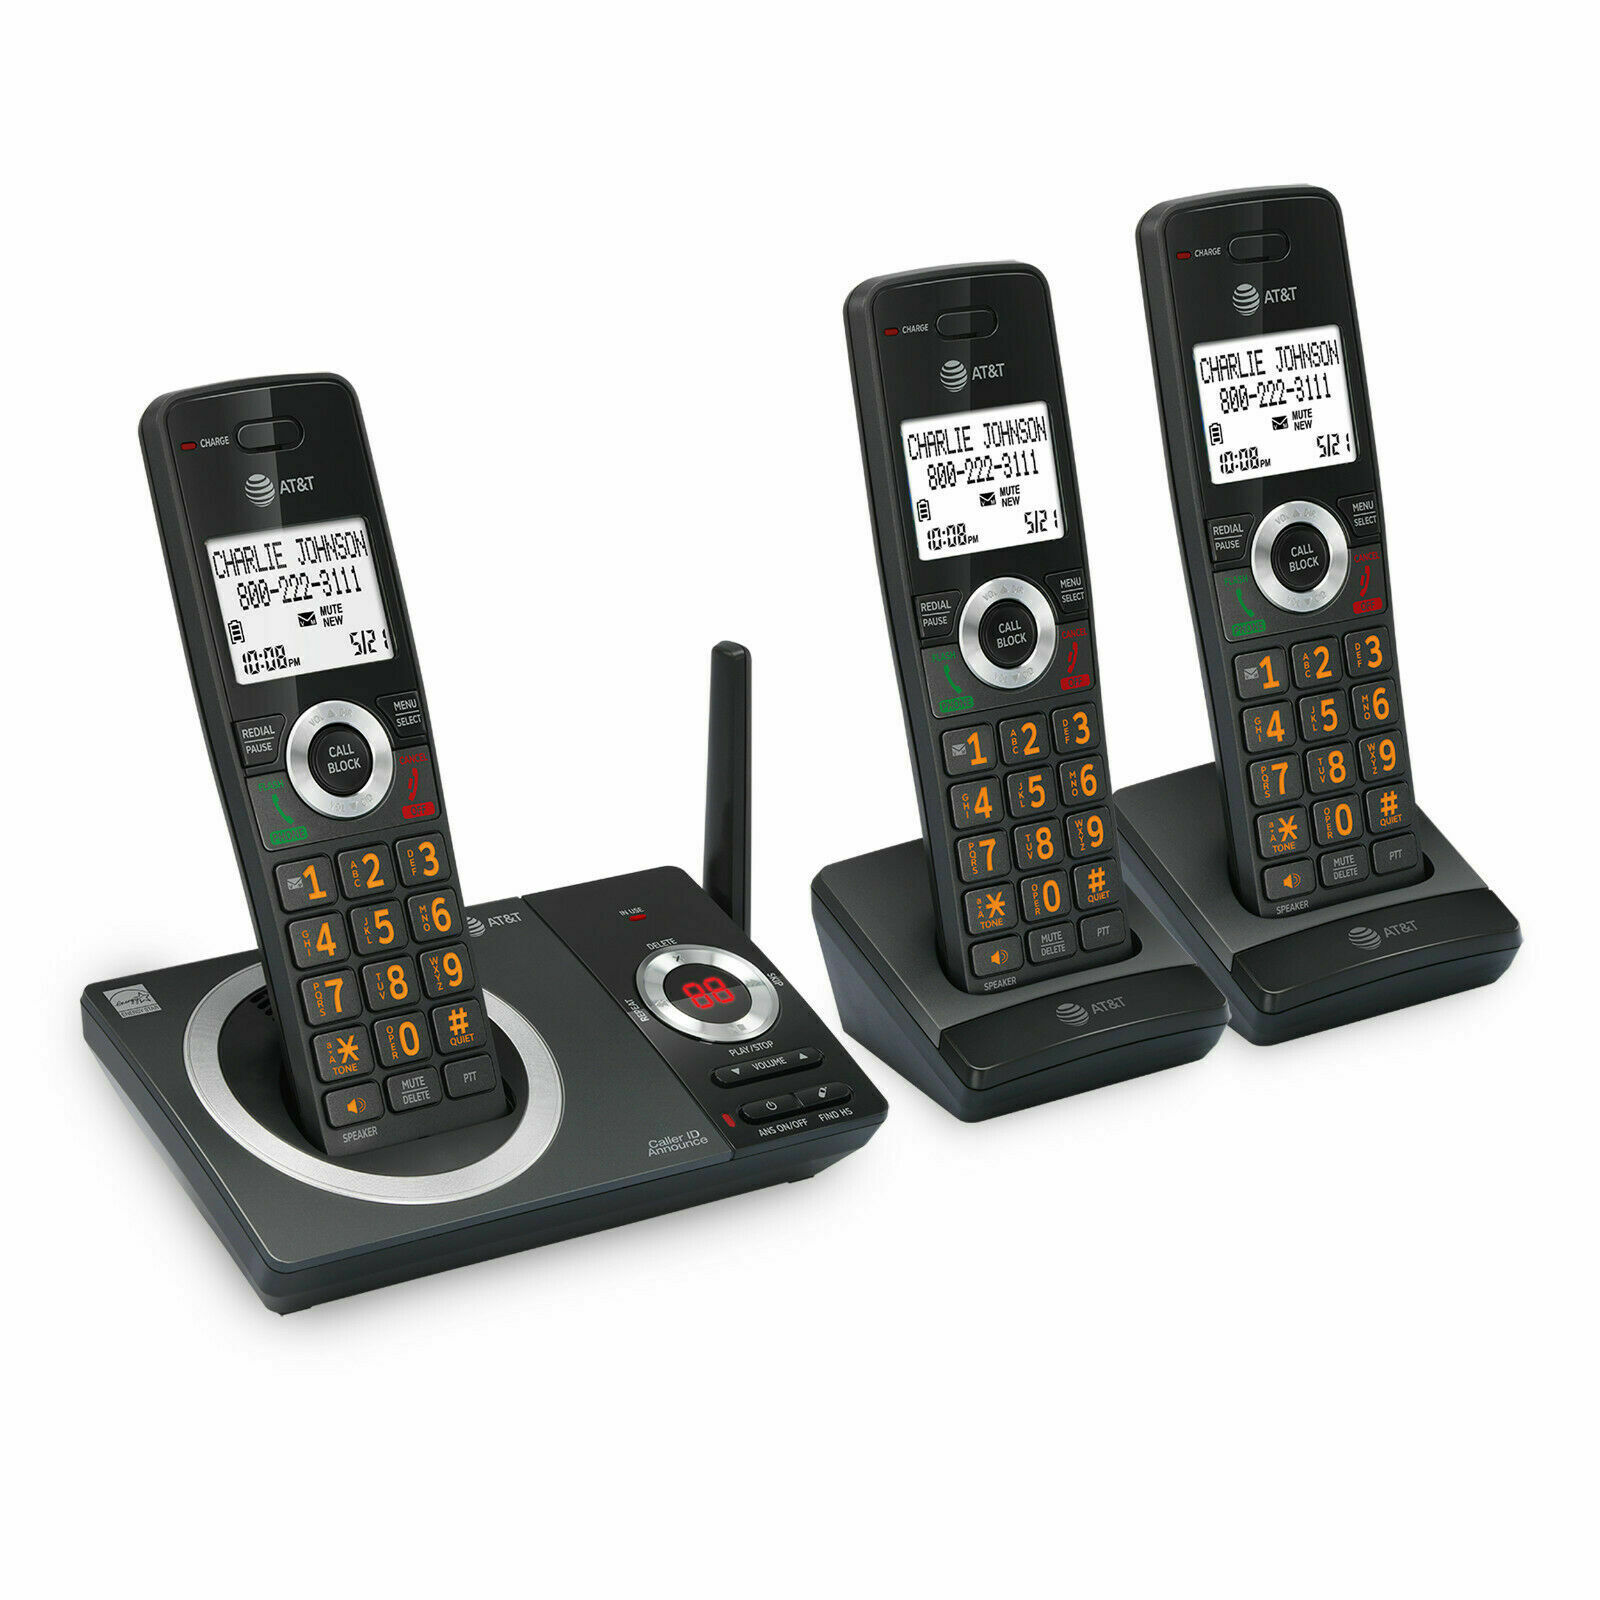 New At&t Cl82319 3 Handset Answering System With Smart Call Blocker